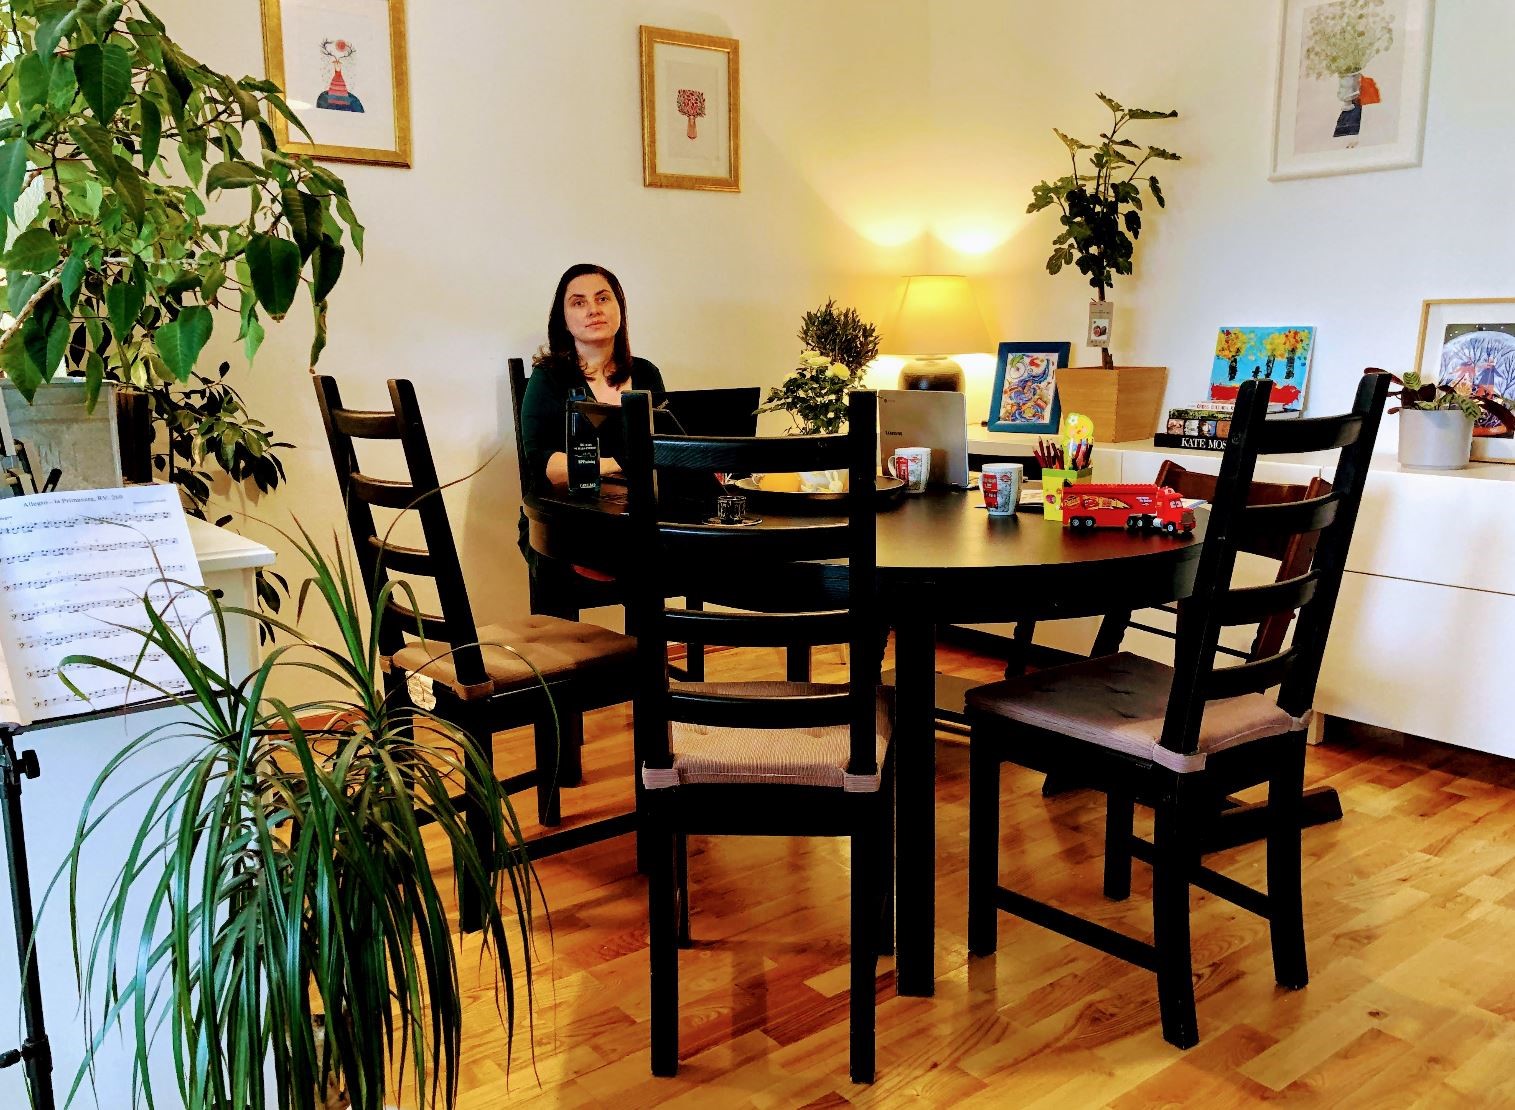 A picture of a woman sitting in her home office, which is a kithen table.